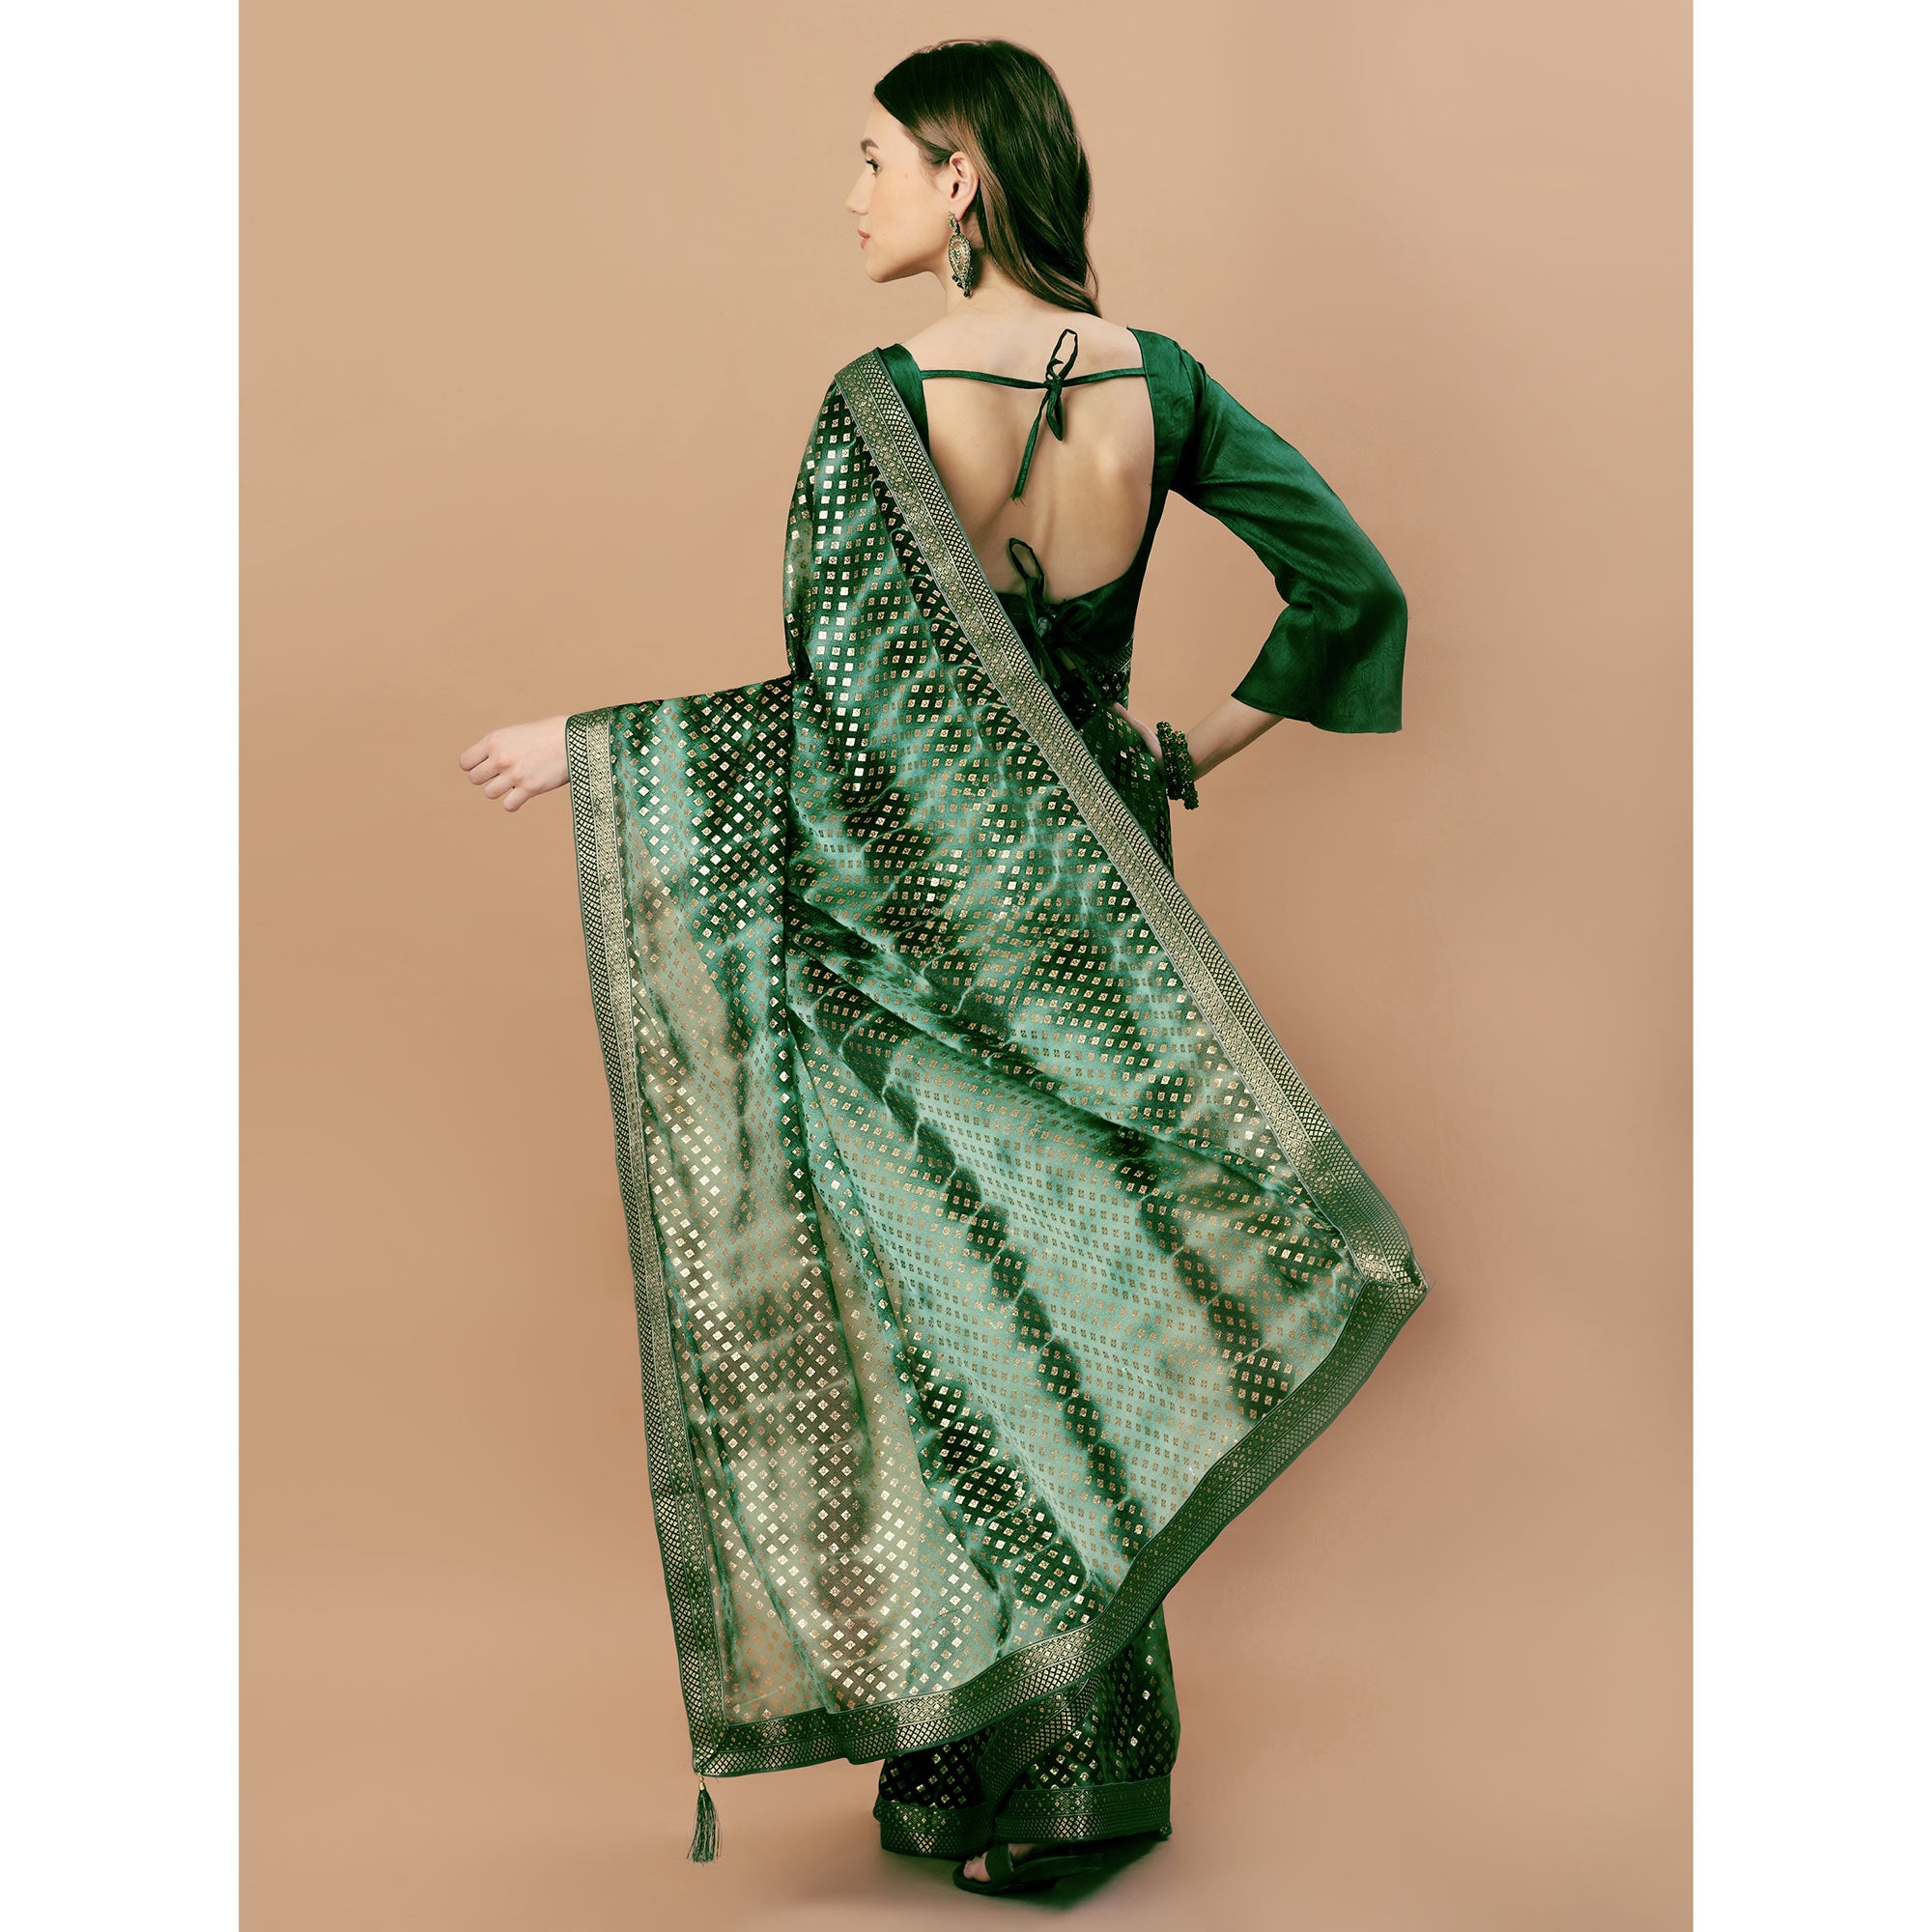 Green Foil Printed Lycra Saree With Lace Border